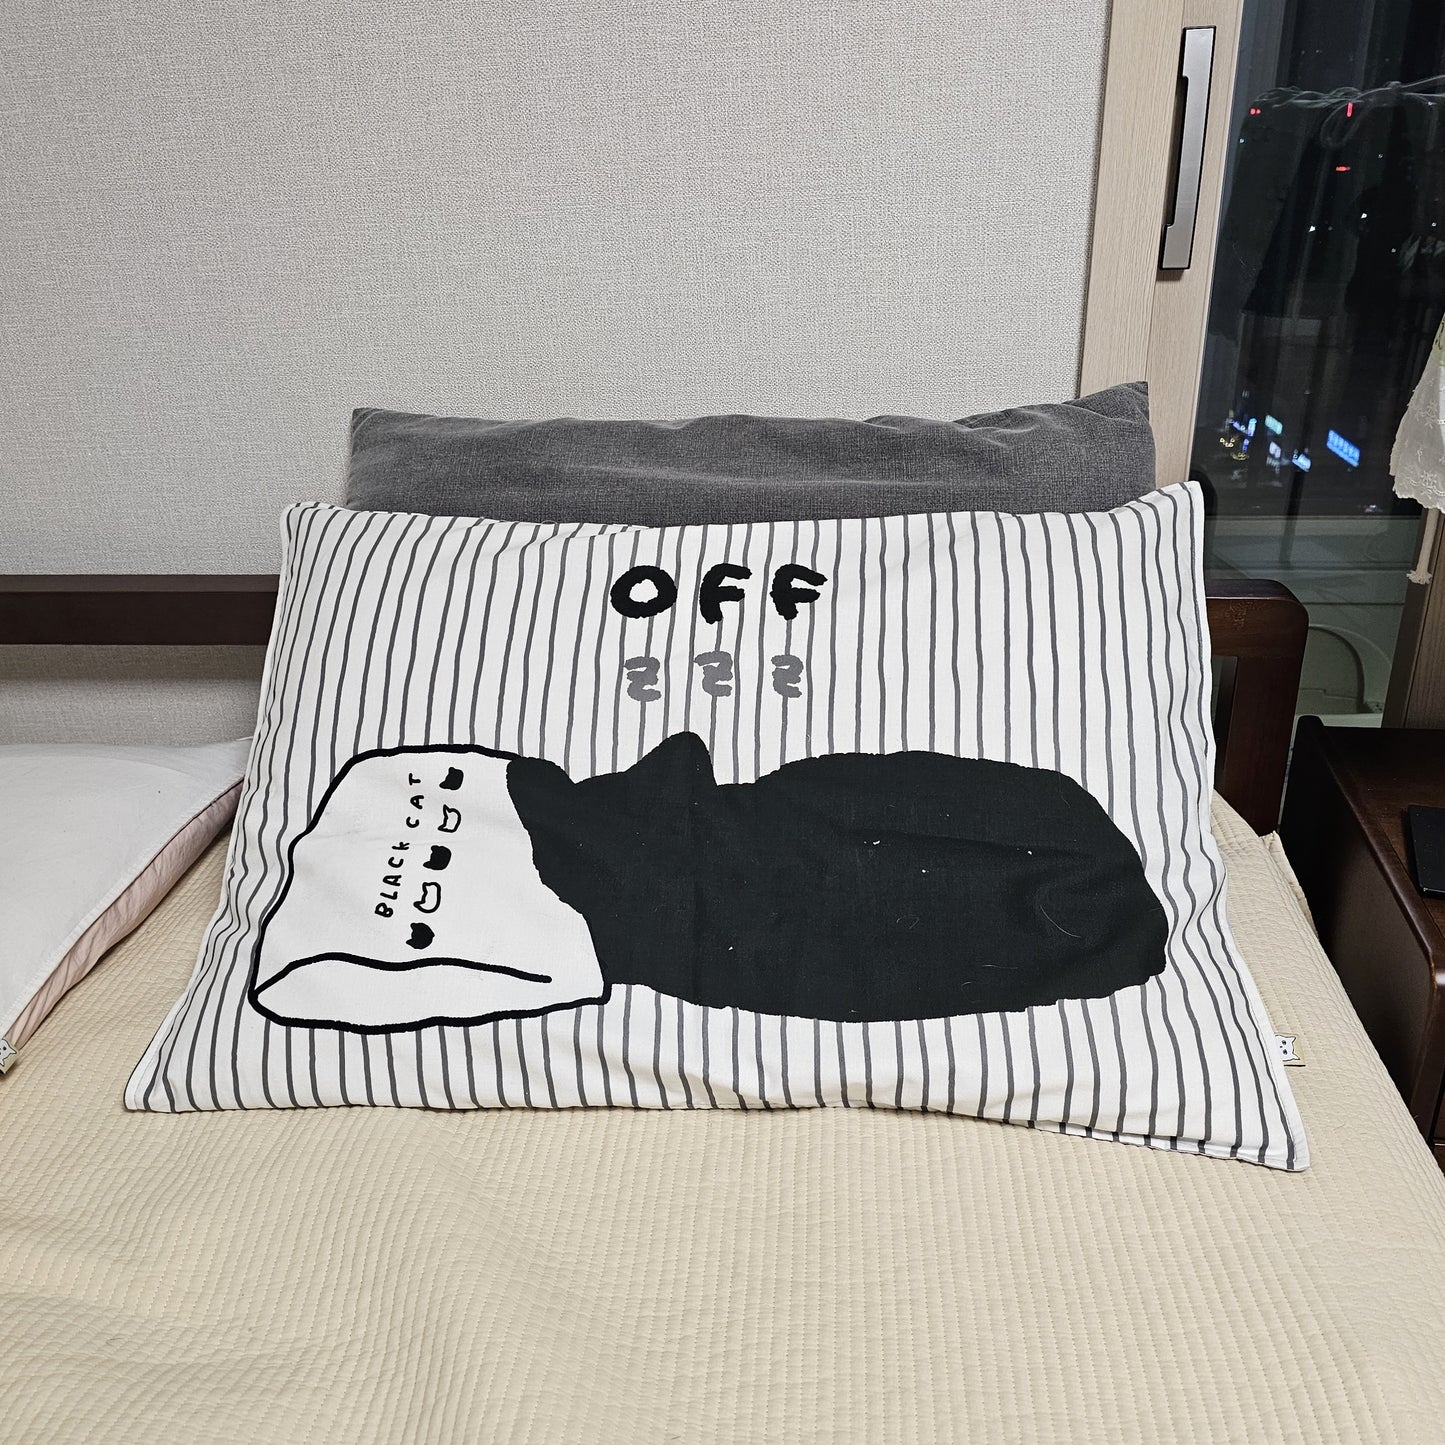 OFF - Pillow cover 5